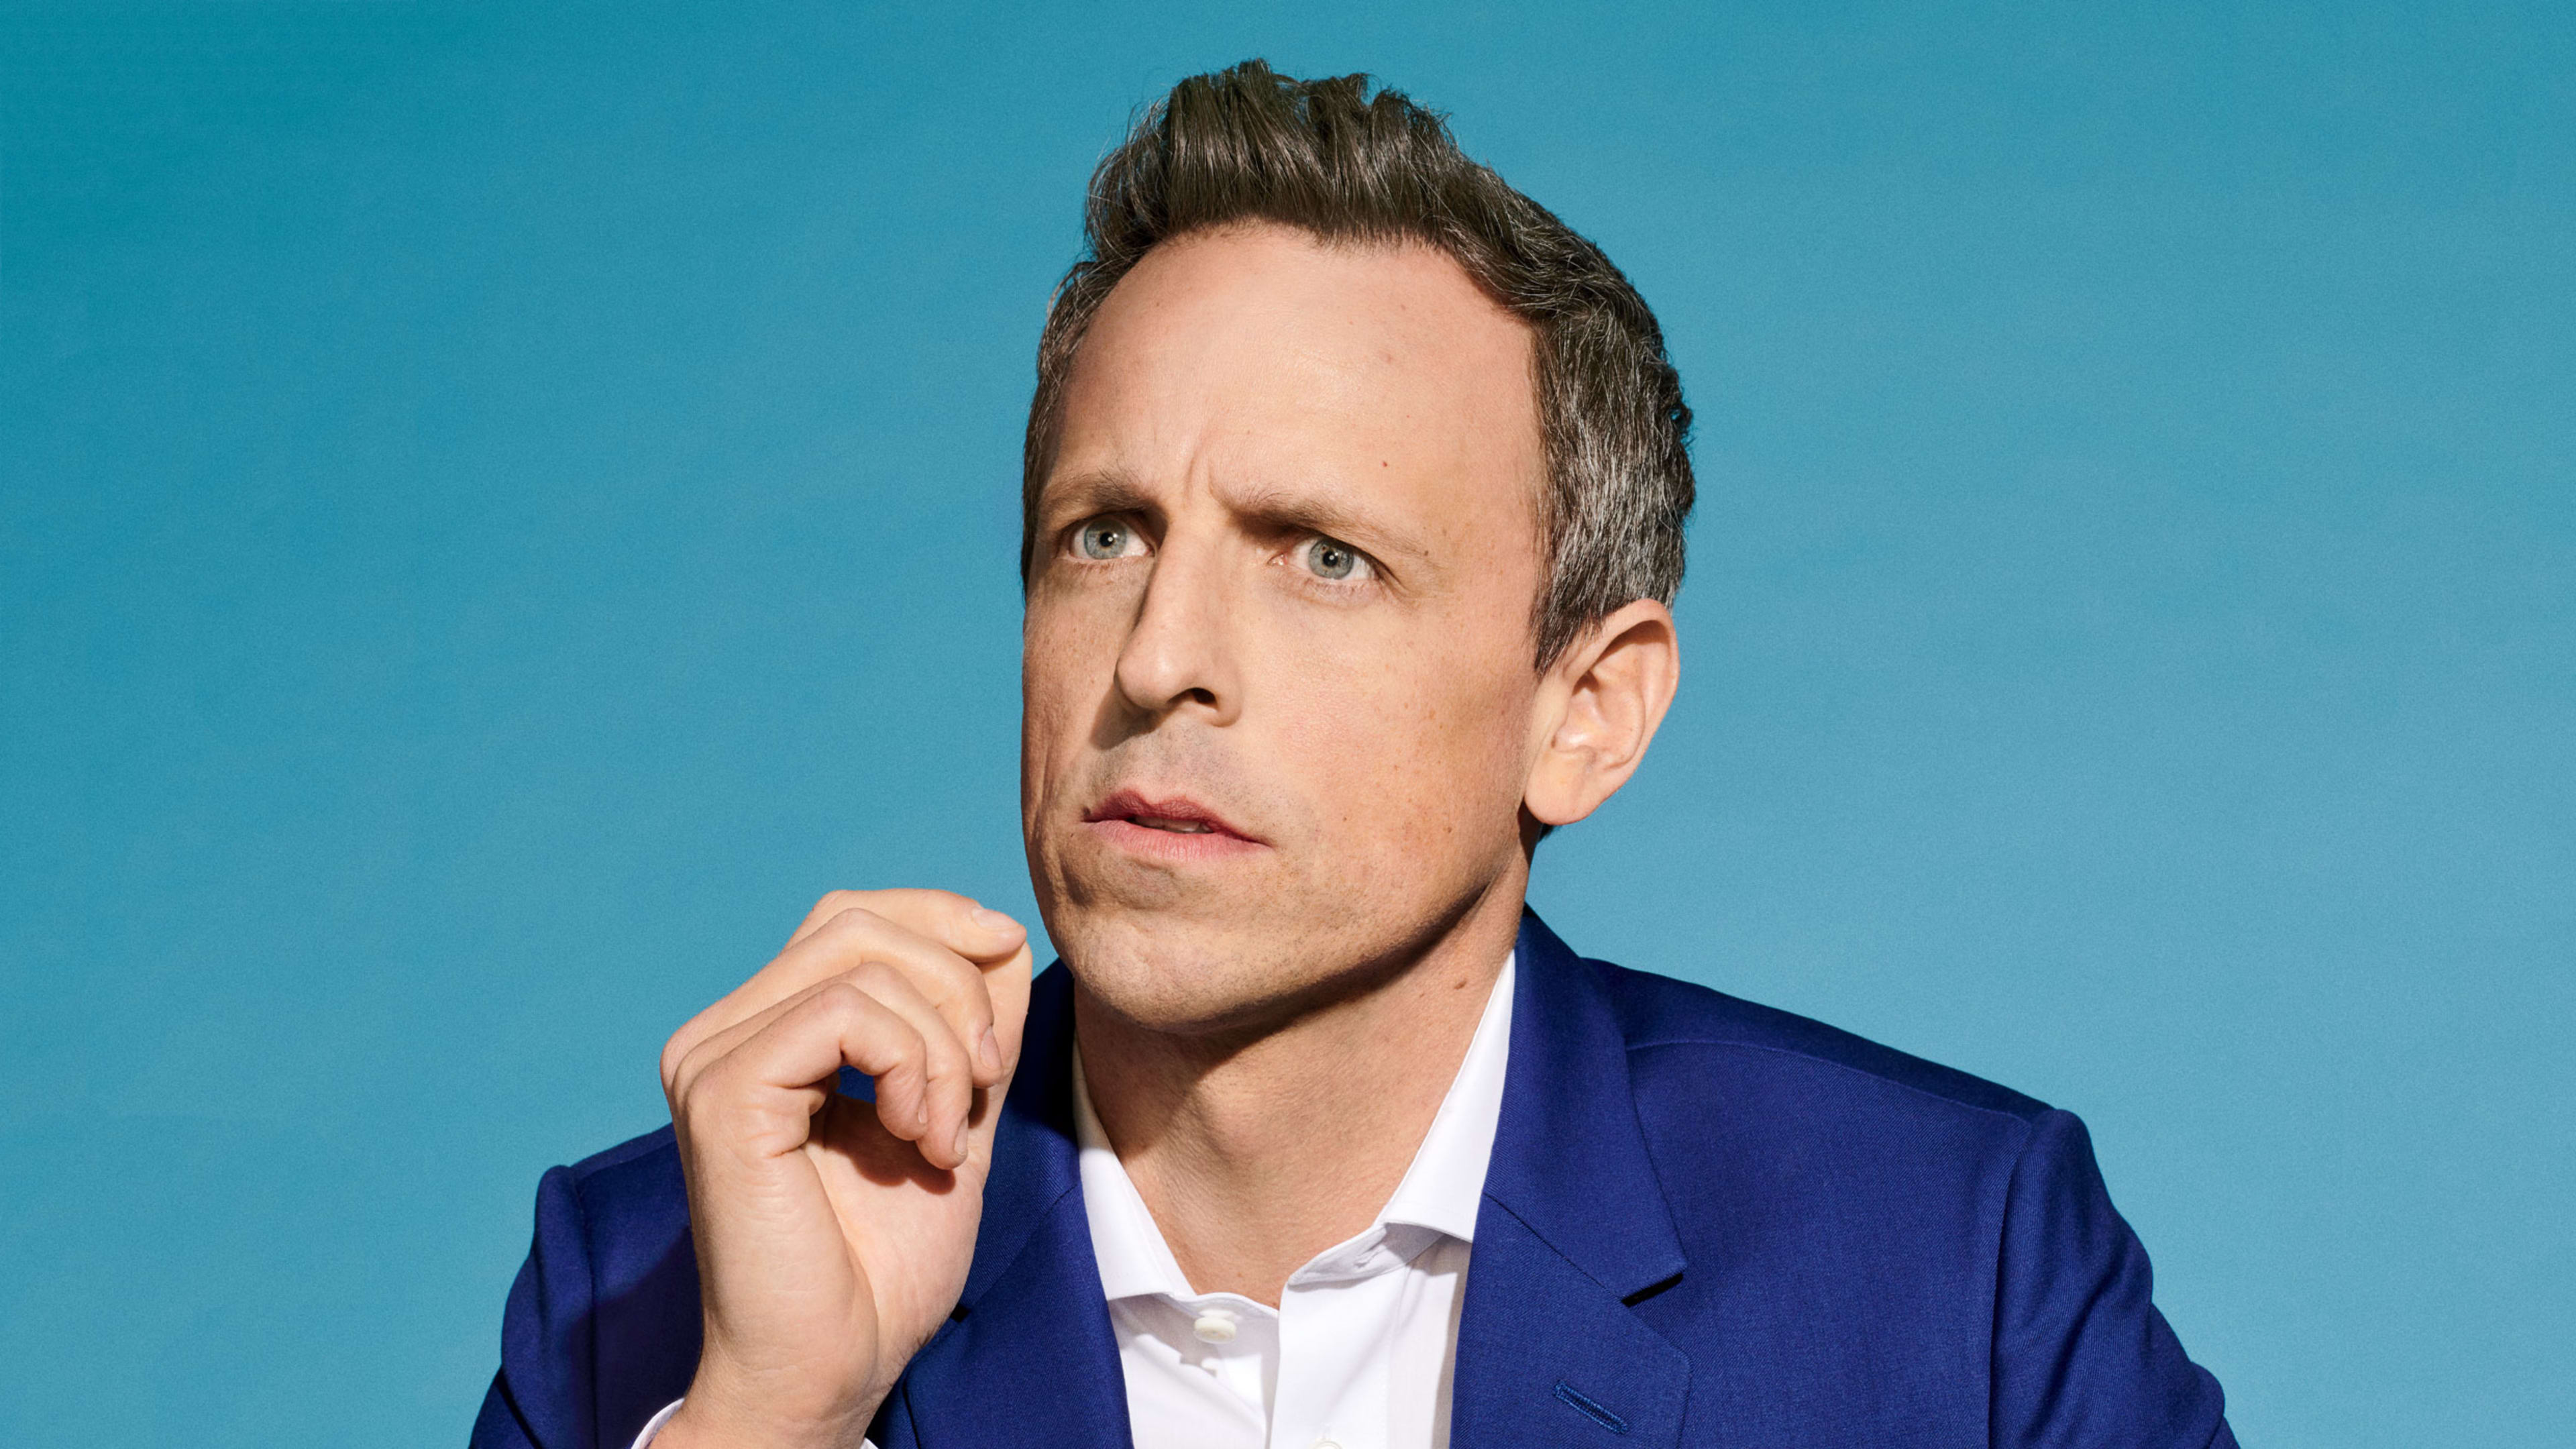 What do Seth Meyers, an investment banker, and a former nun have in common?